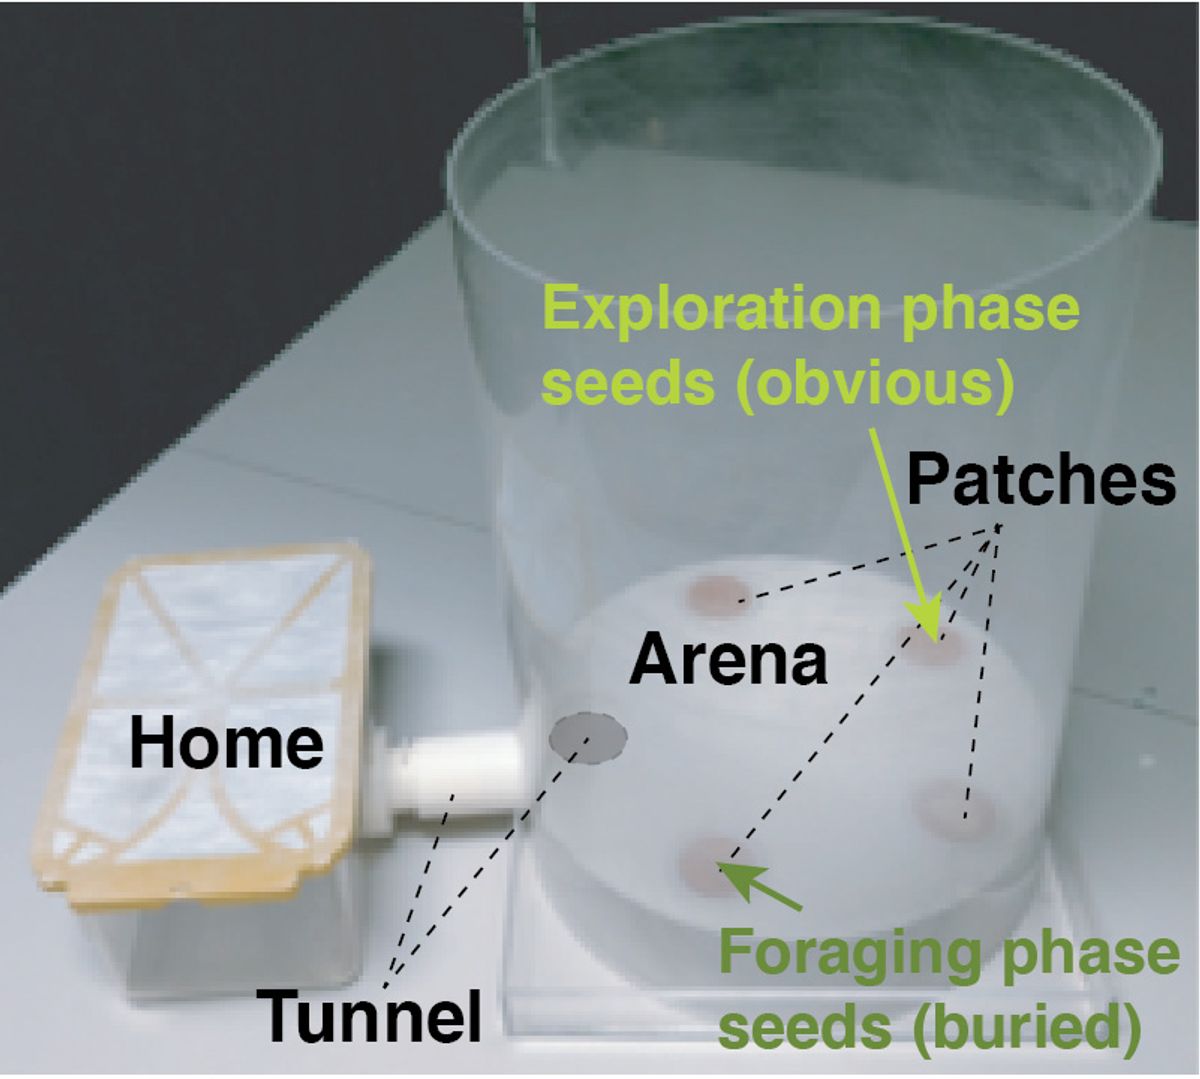 A photo of the mouse enclosure and foraging area used in the experiment. A plastic box labeled home is connected to a large cylinder with clear plastic walls, which is labeled arena. Inside the arena are small circular regions where seeds could either be displayed or buried under sand.